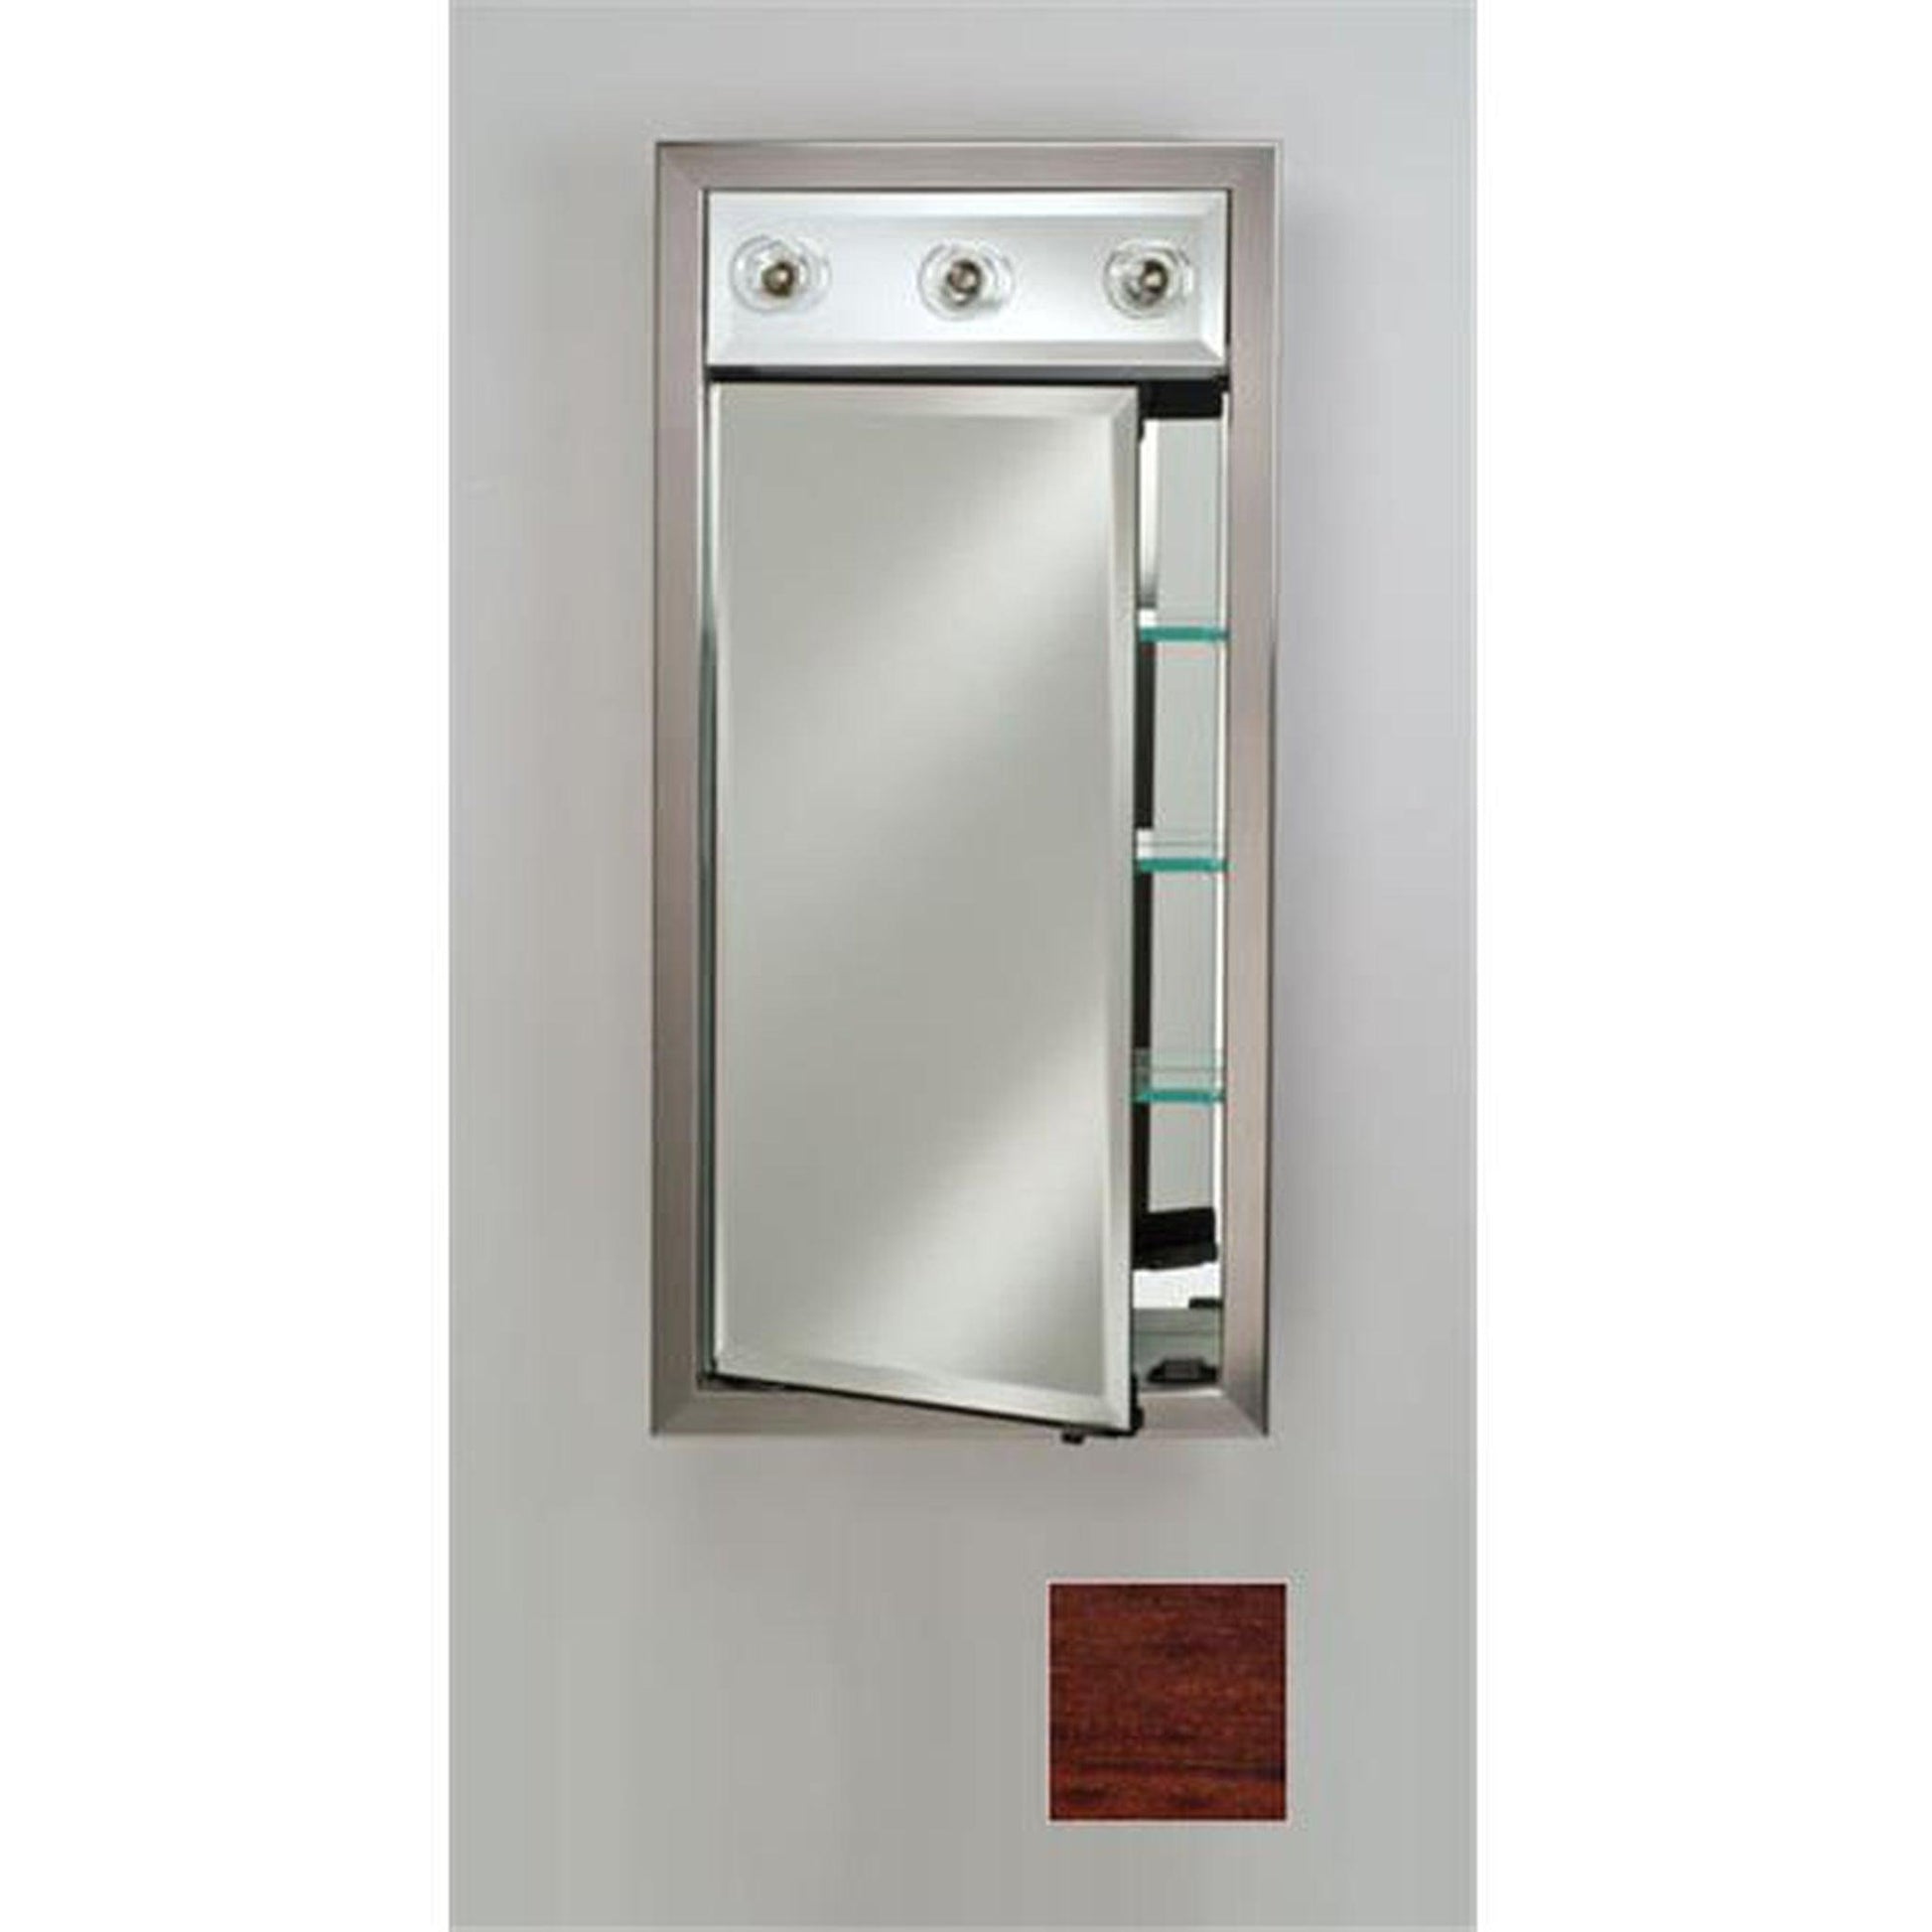 Afina Signature 17" x 34" Arlington Cherry Recessed Right Hinged Single Door Medicine Cabinet With Contemporary Lights